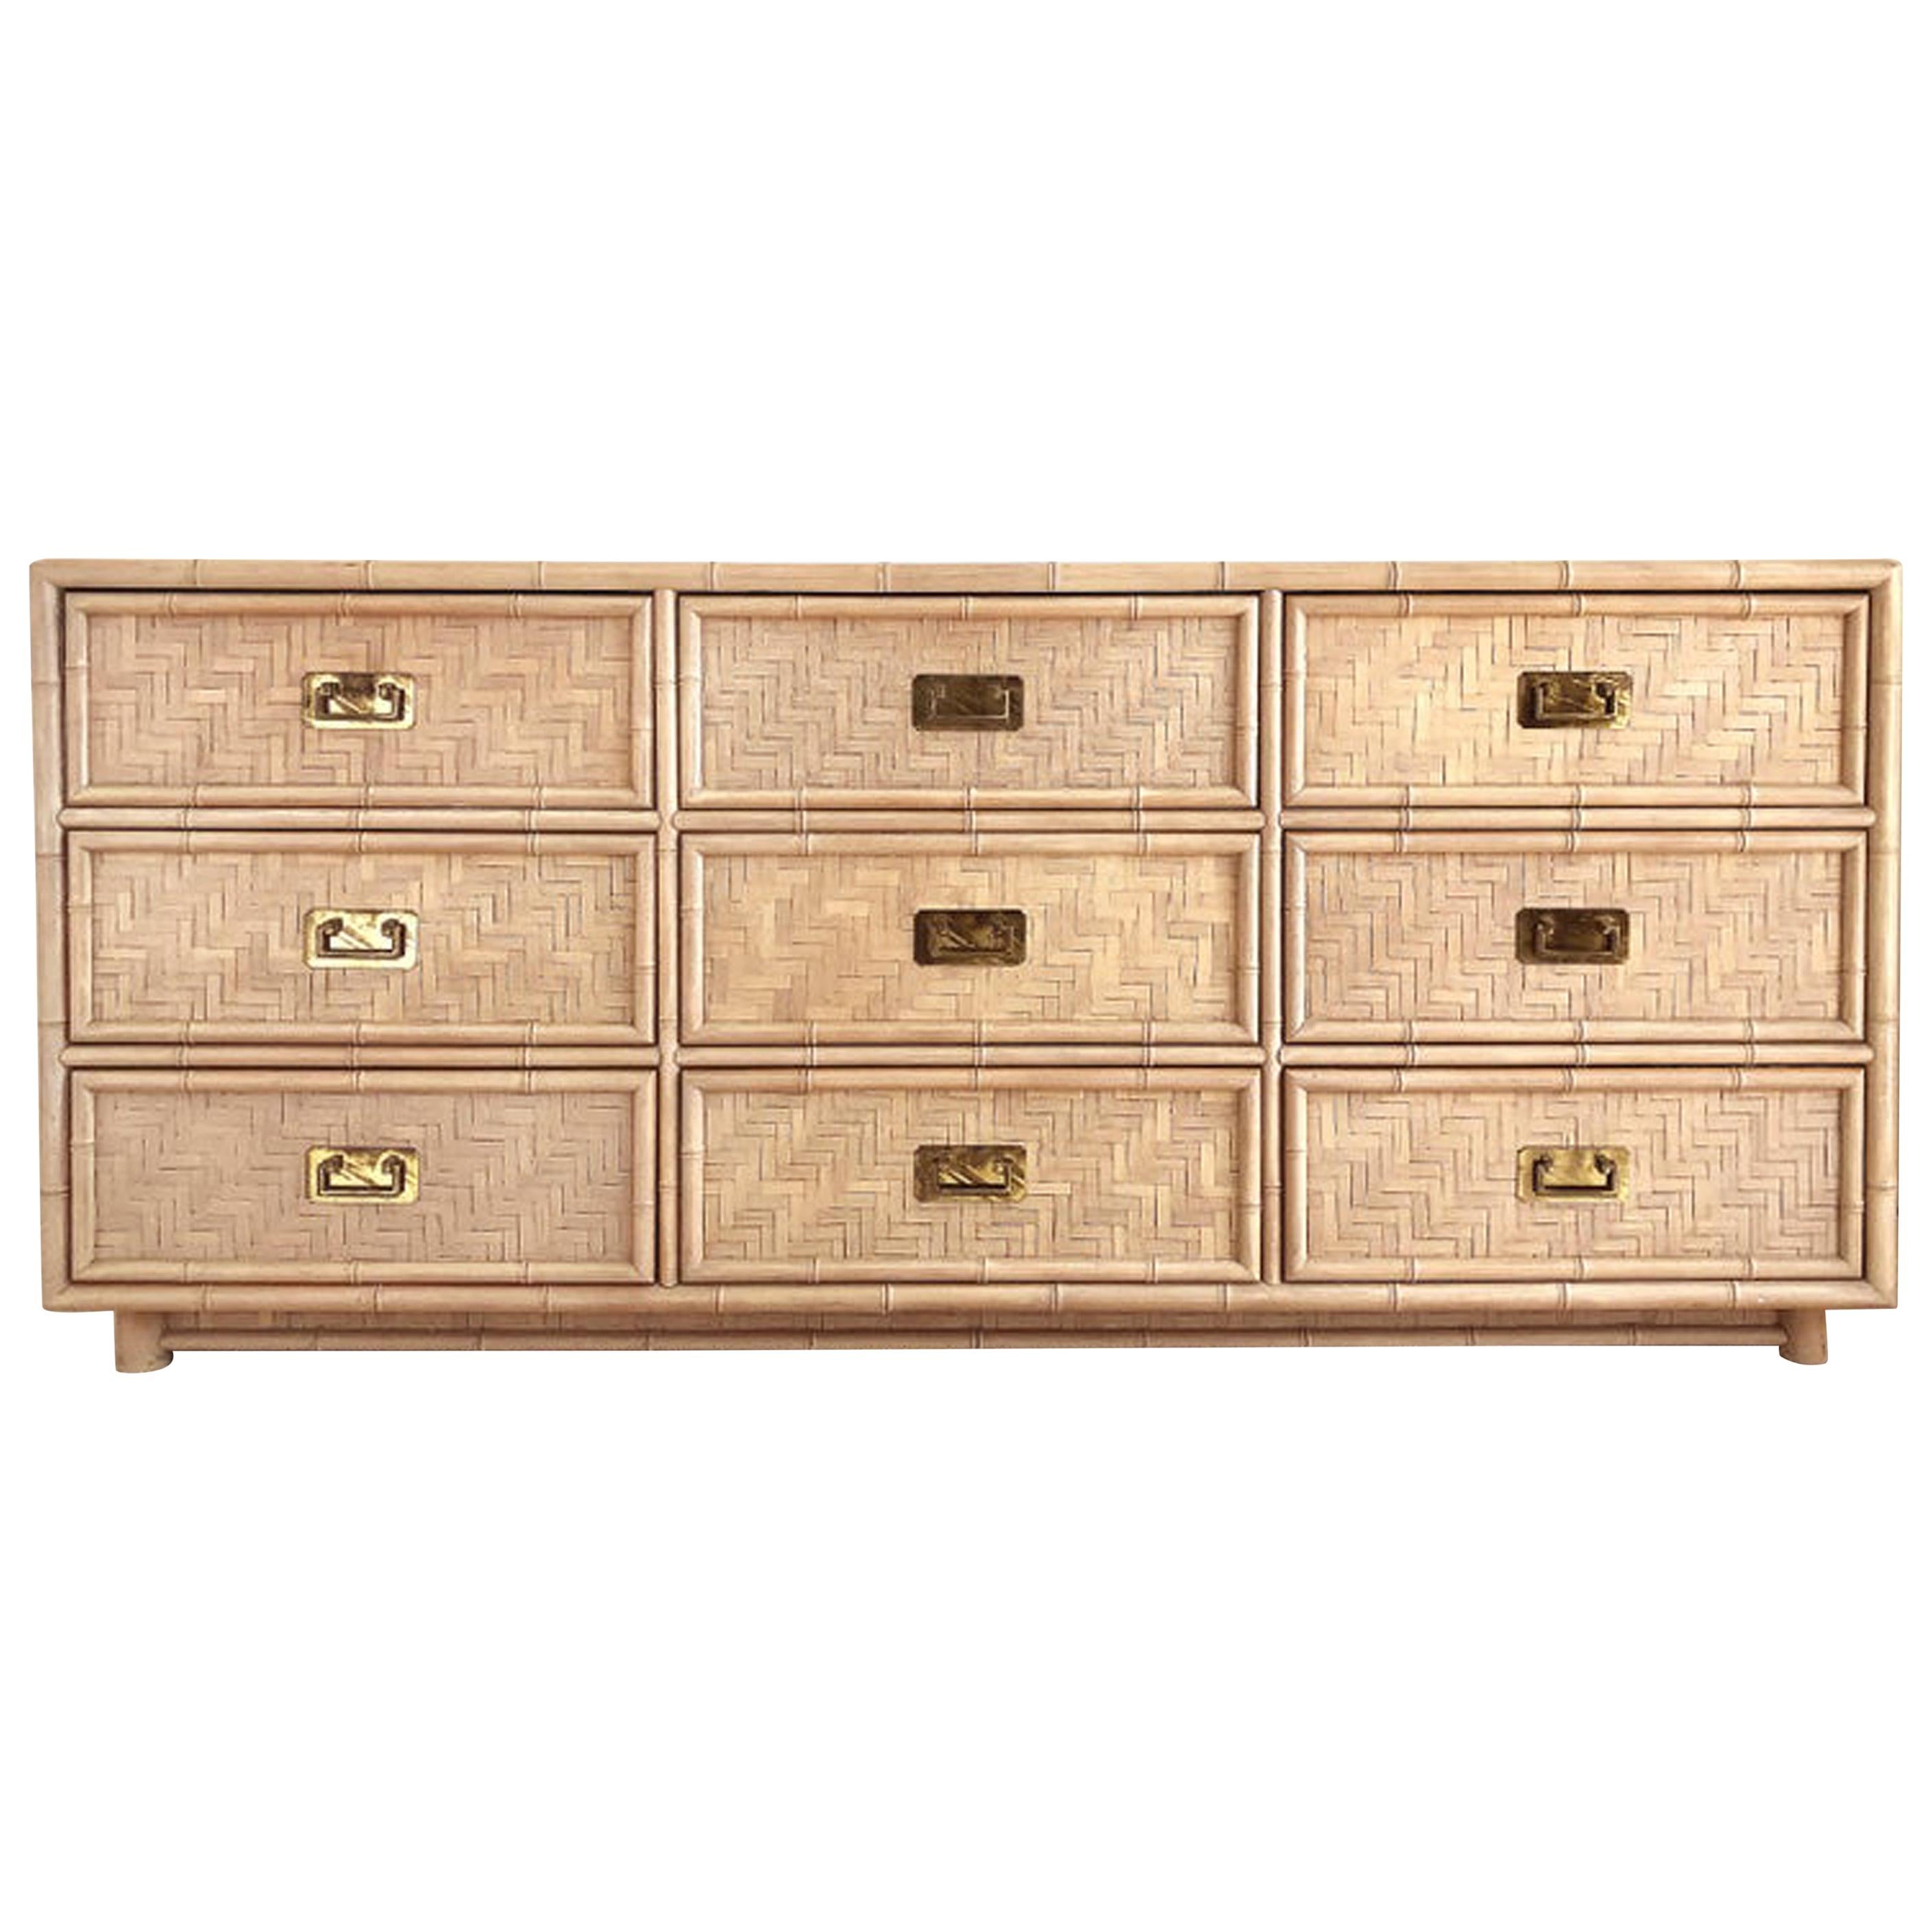 Costal midcentury woven rattan 9-drawer dresser

Offered for sale is a 1970s vintage coastal modern woven rattan 9-drawer dresser. The dresser has a wood frame with woven split rattan and brass hardware. It has been finished in a soft pink